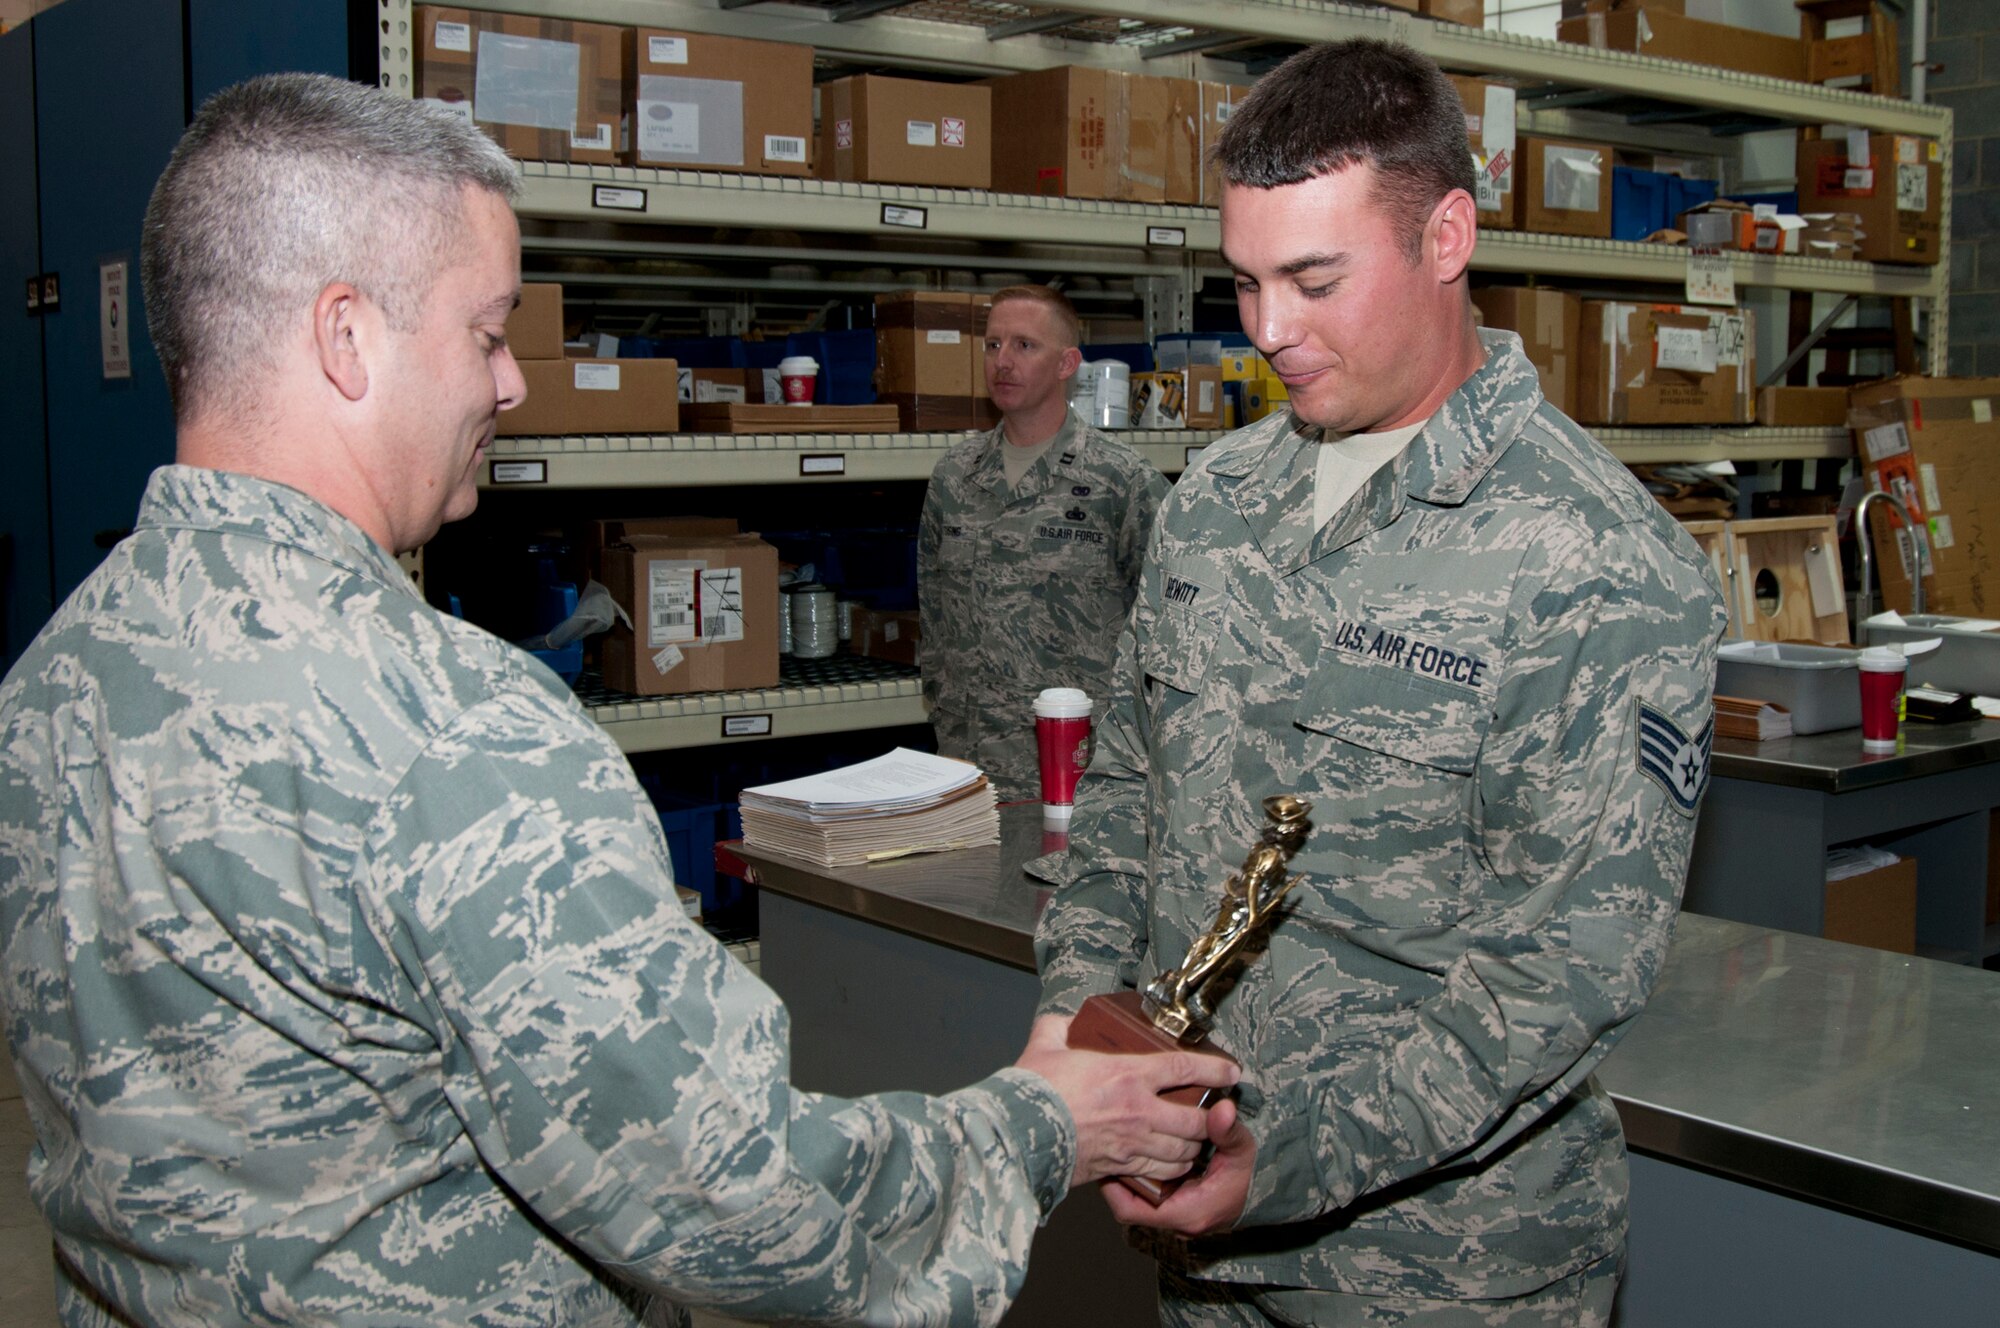 Staff Sgt. Michael Hewitt receives the Air National Guard Traffic Management NCO of the Year trophy from Maj. Charles Nassar Sunday, June 5, 2011. Hewitt was nominated for the award by Senior Master Sgt. Floyd Angelo. (National Guard photo by Staff Sgt. Michael Dickson)